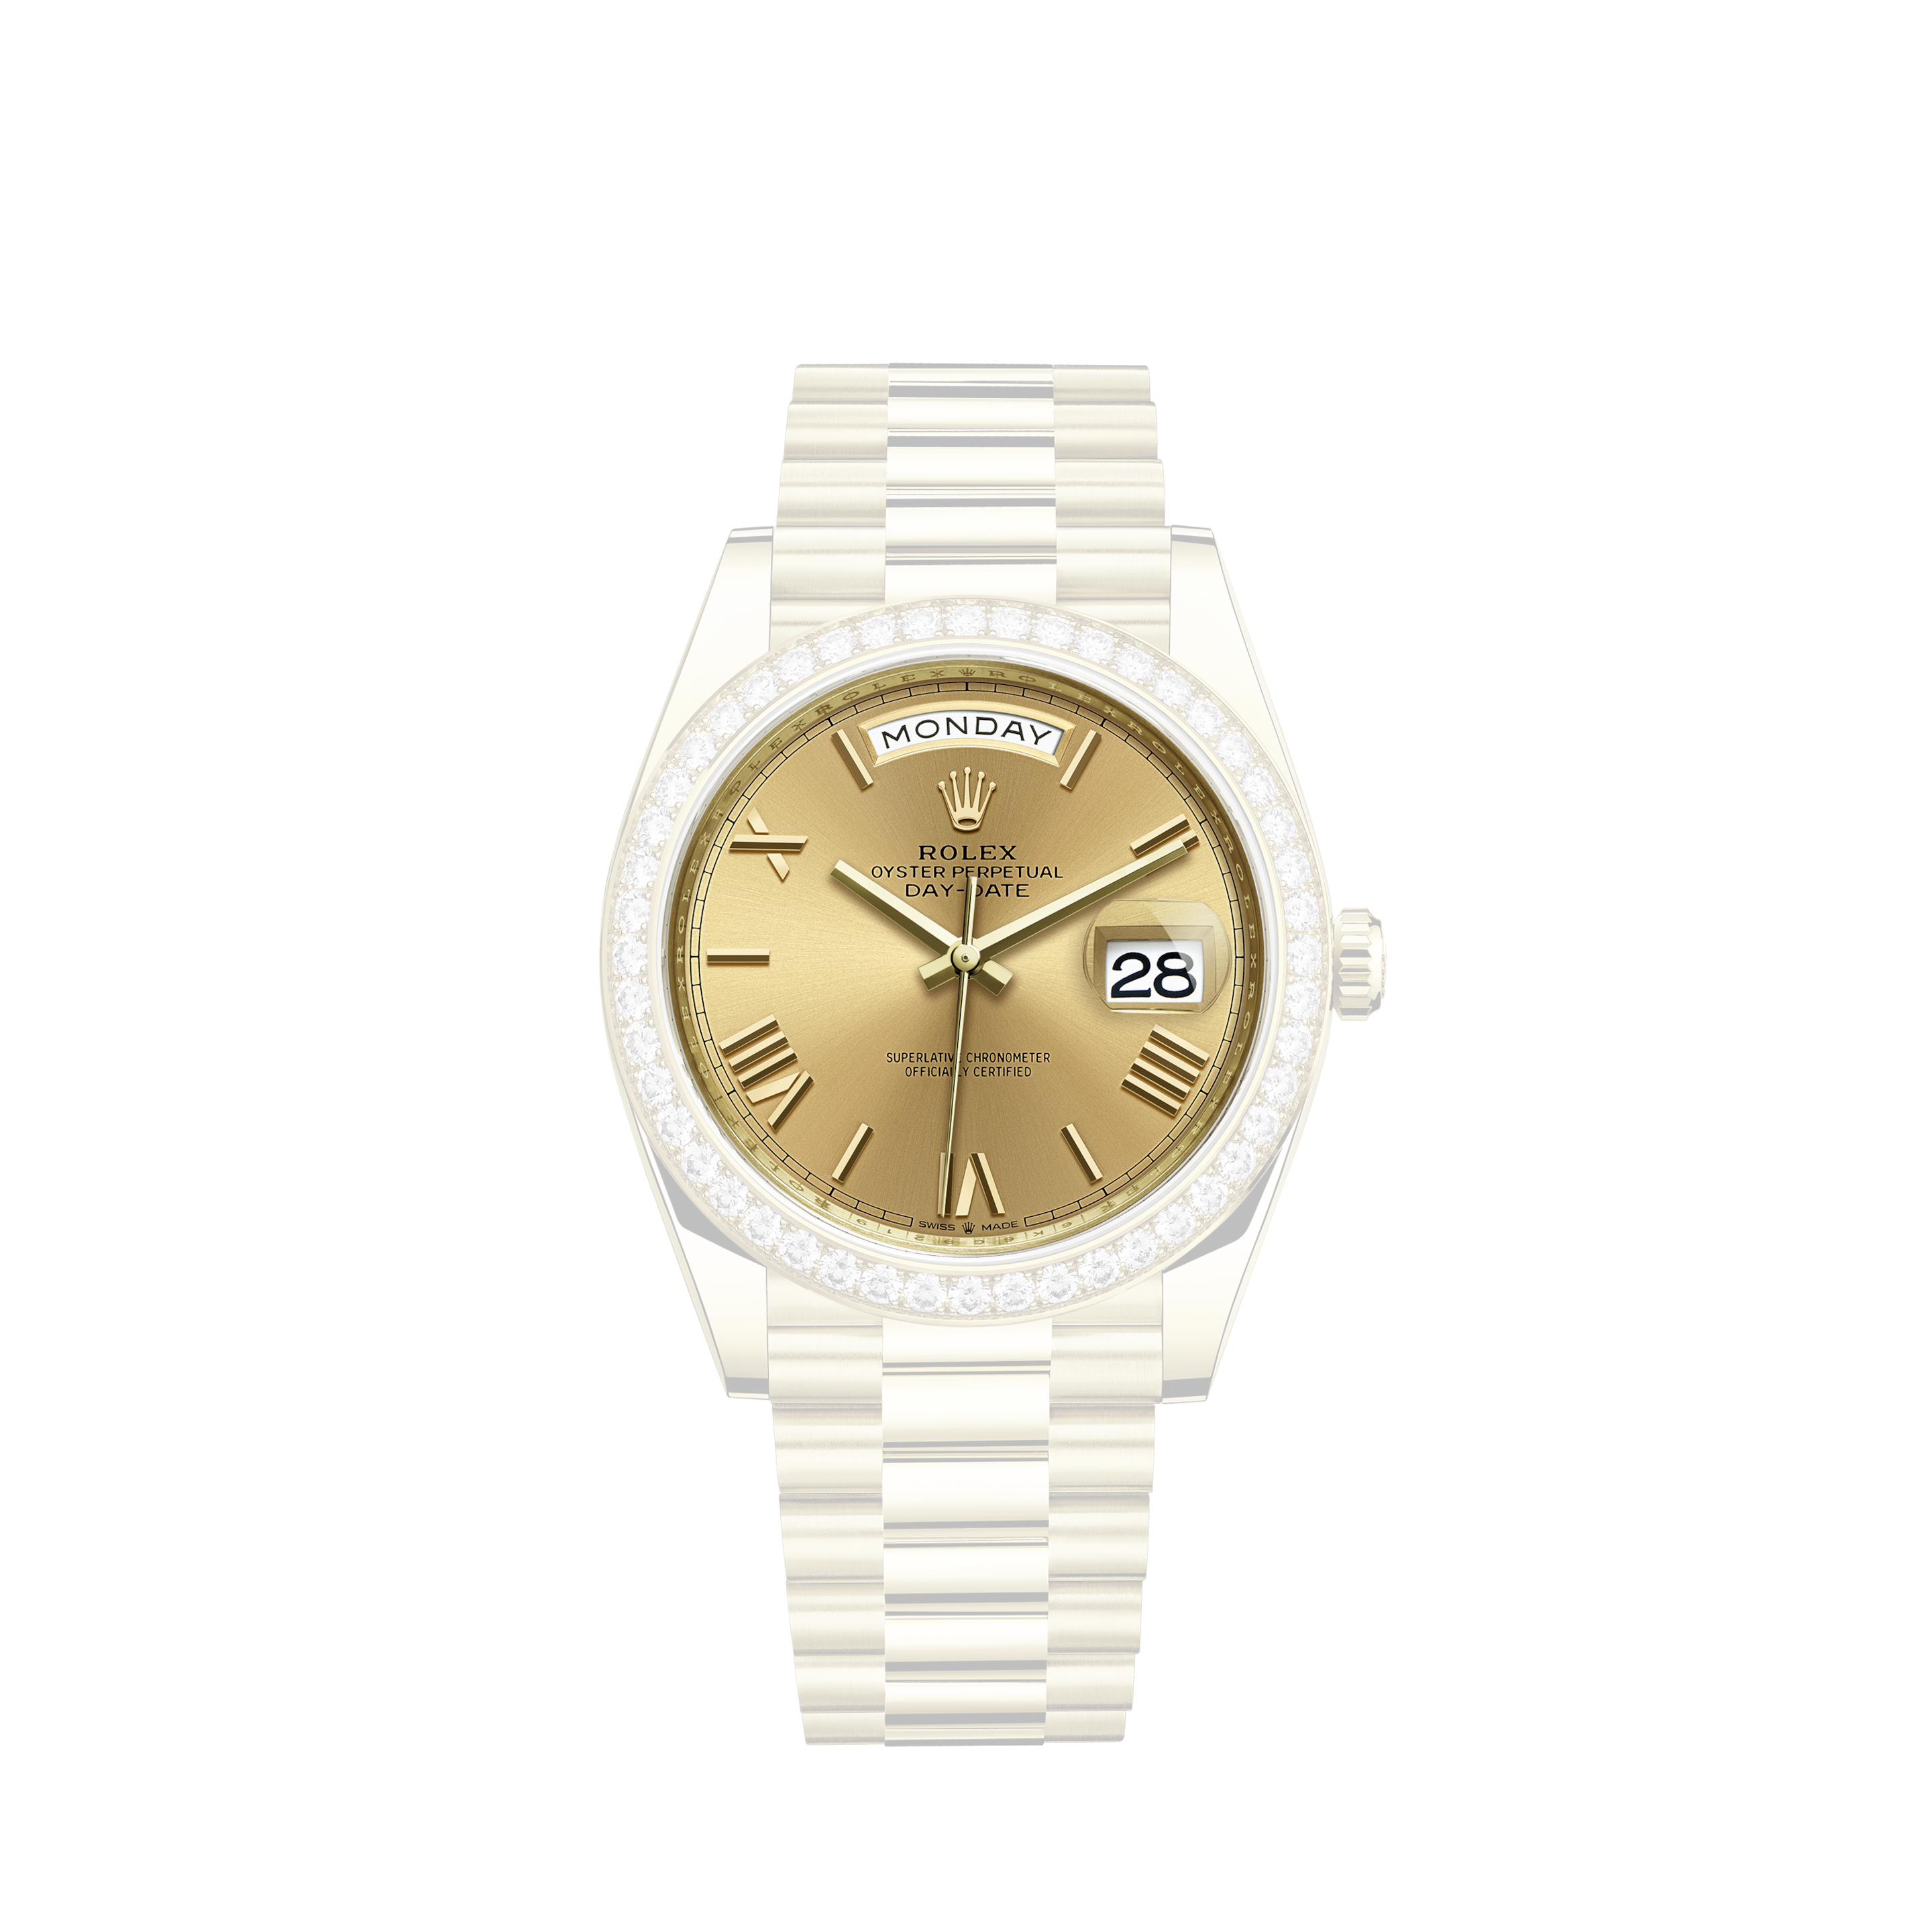 Rolex Datejust Steel/White Gold Ref: 1601 with Rolex Box from 1977